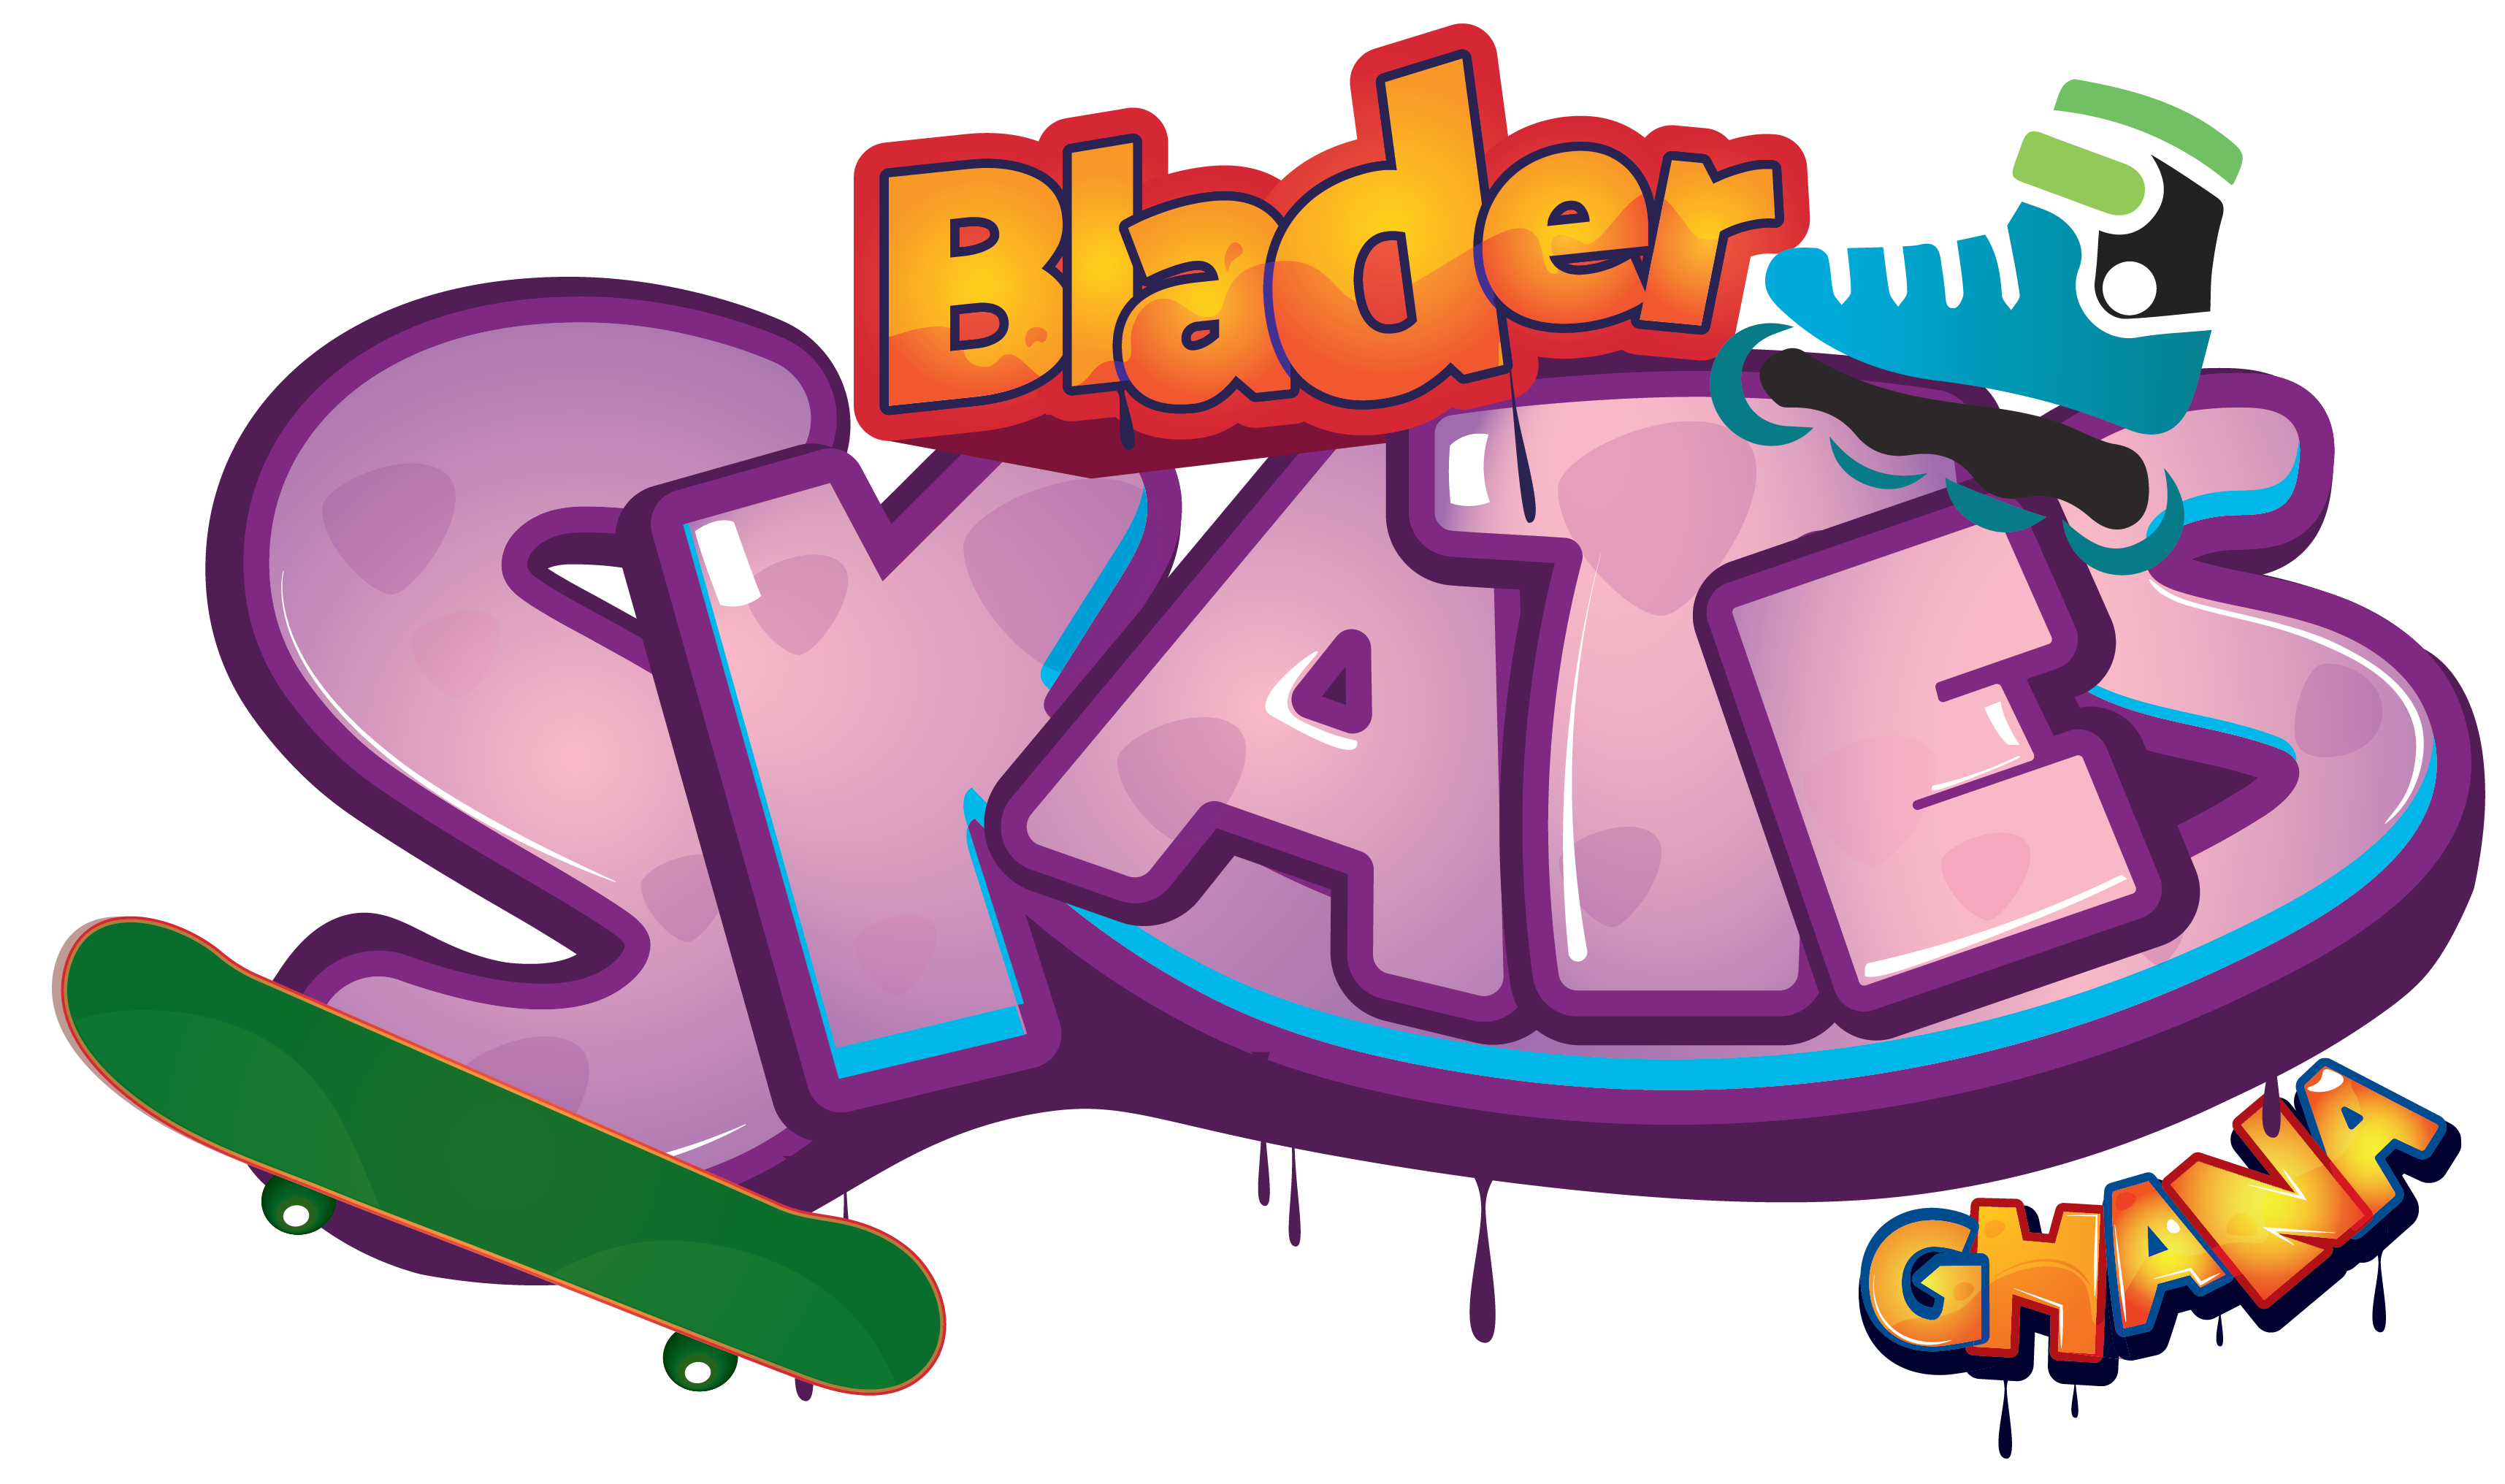 Bladers Charity Foundation